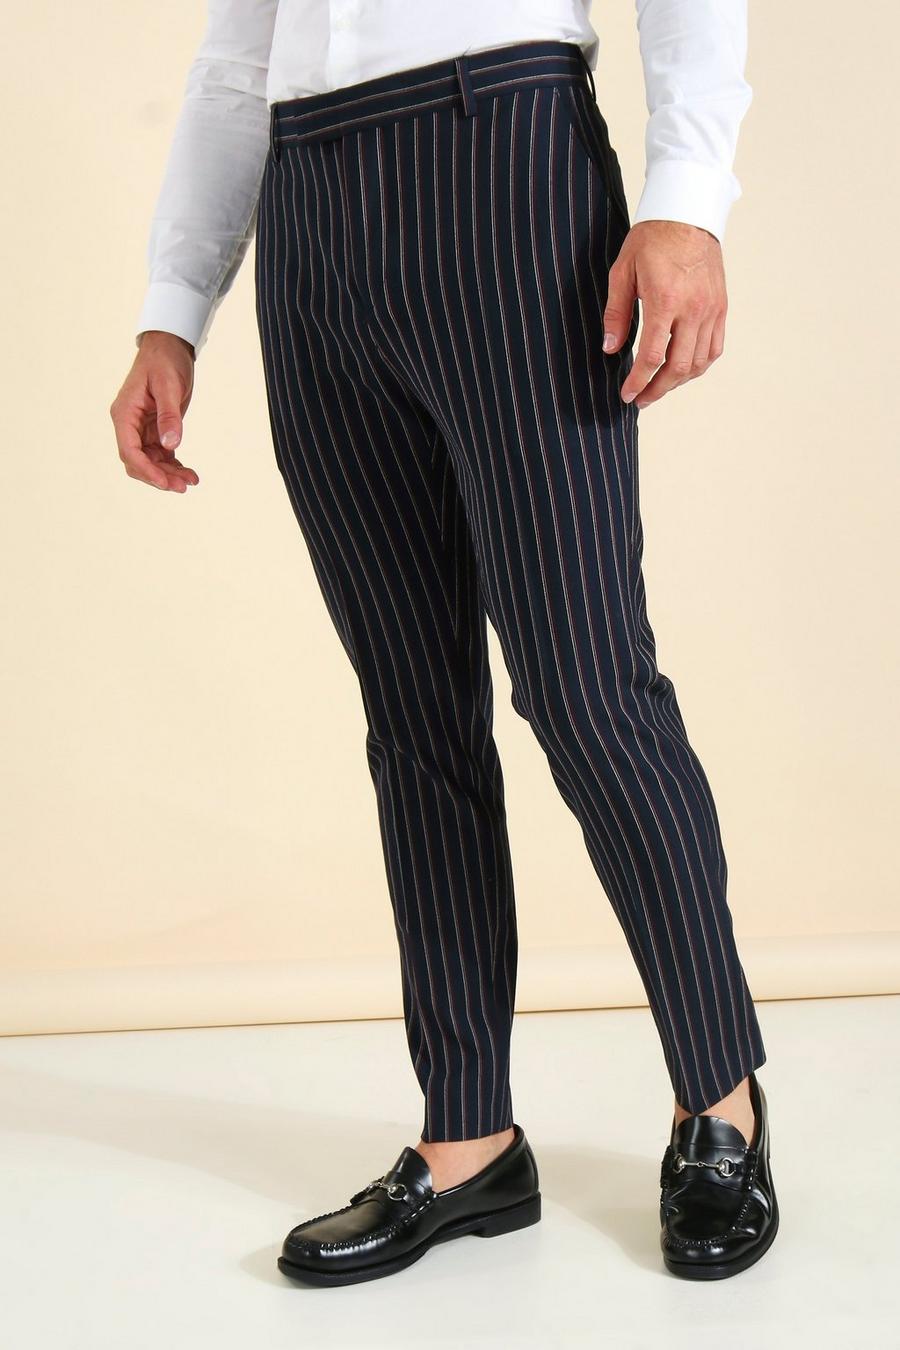 Pantaloni Skinny Fit a righe verticali, taglio sartoriale, Navy image number 1